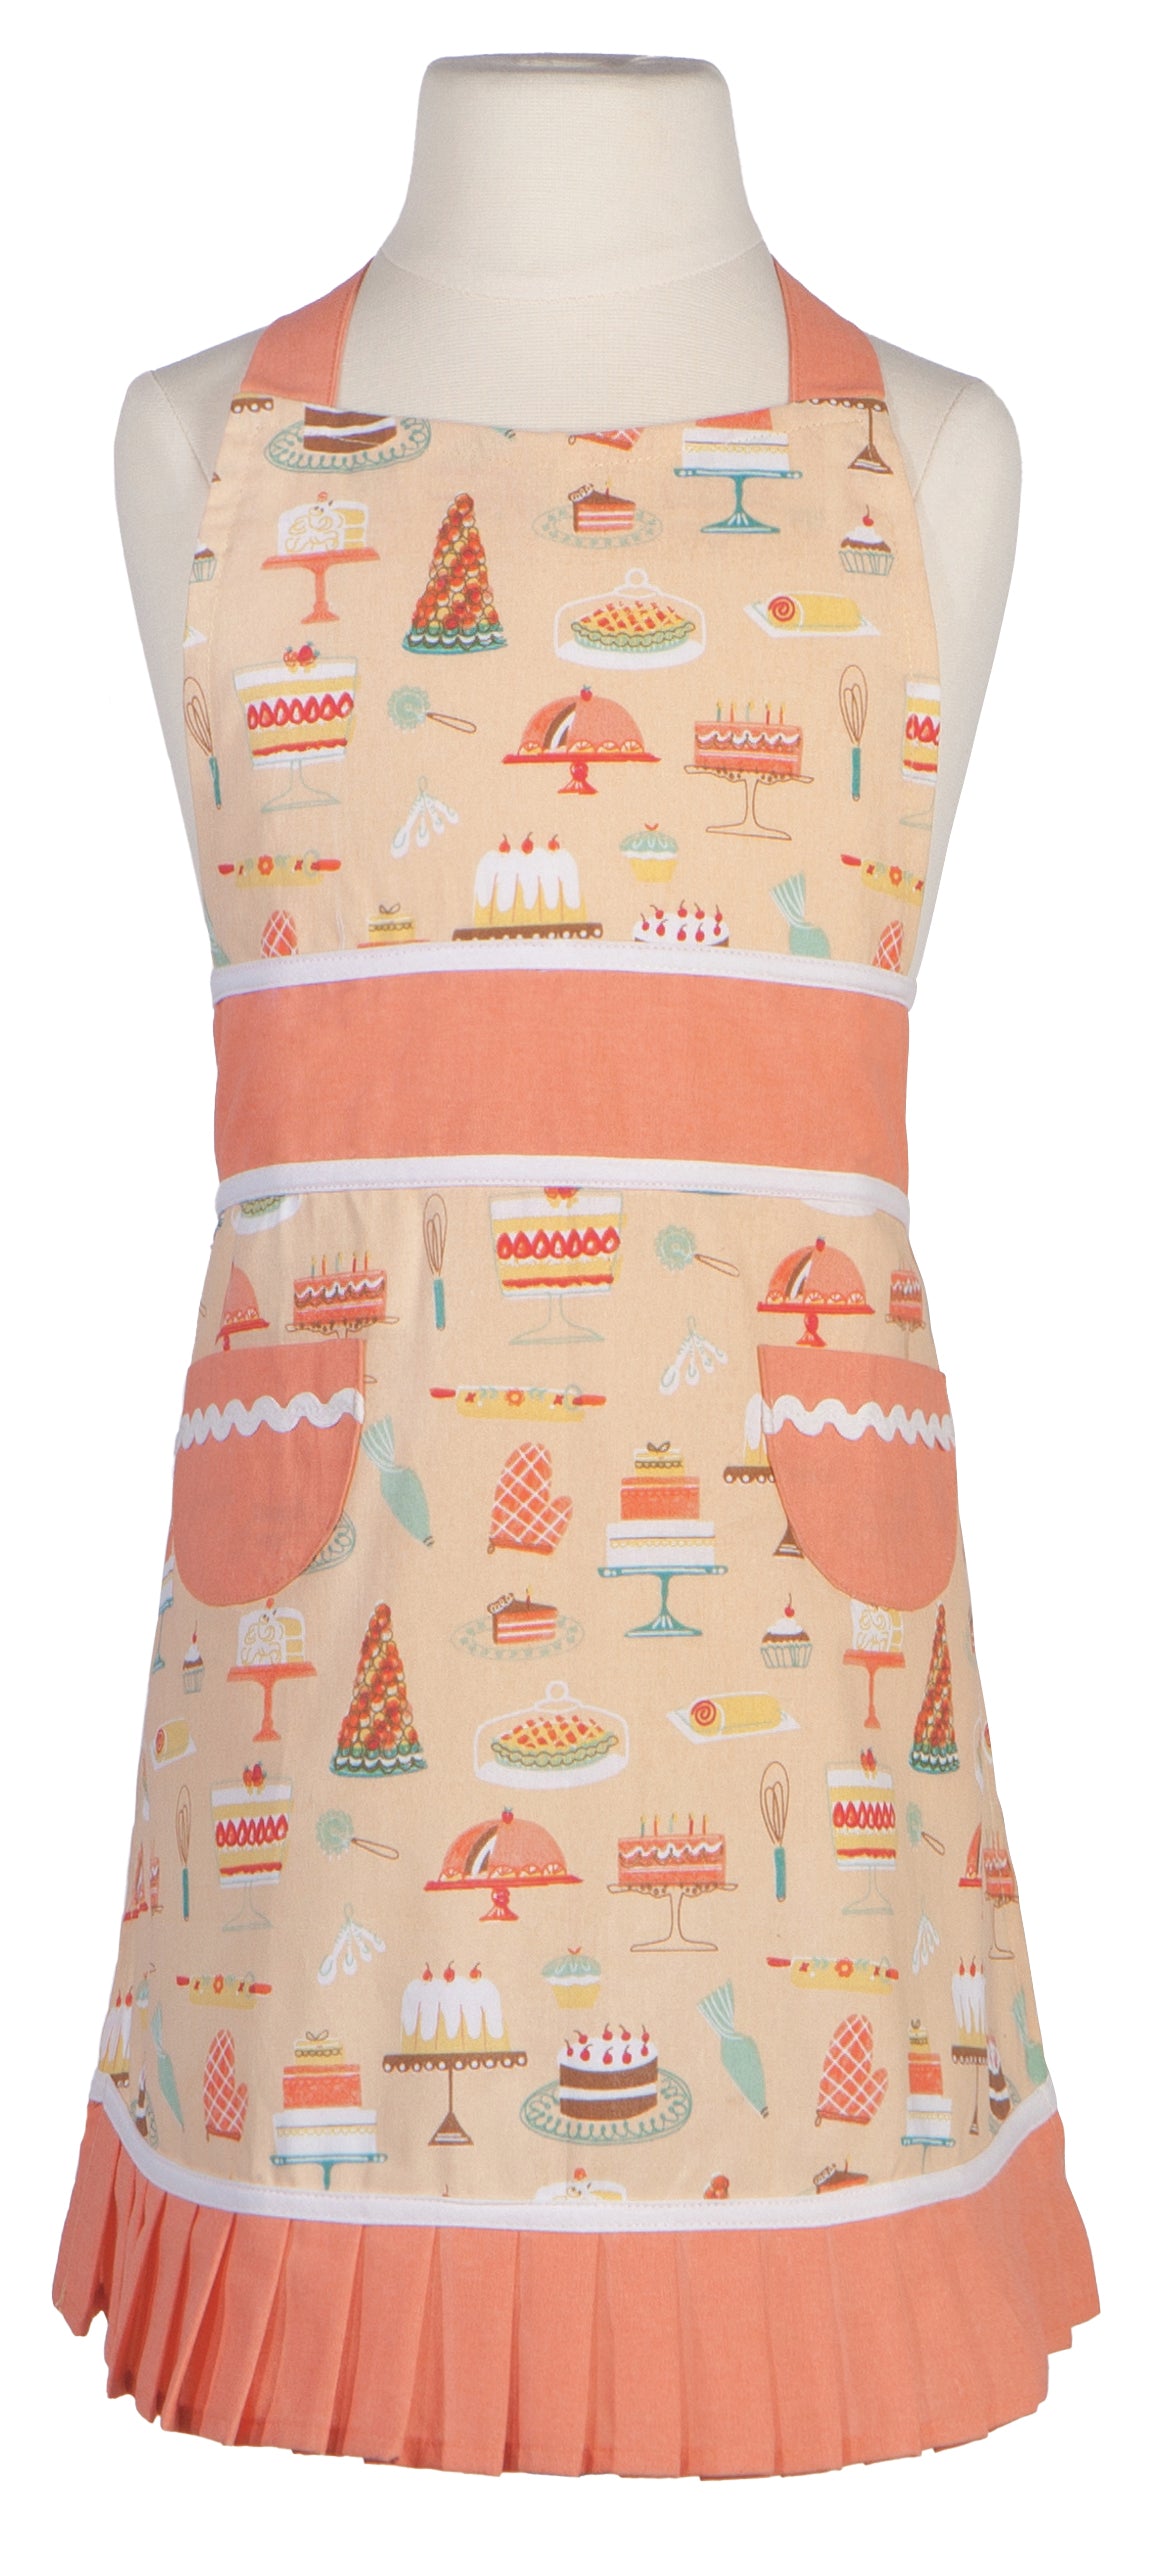 Aprons - Sally (Childrens)